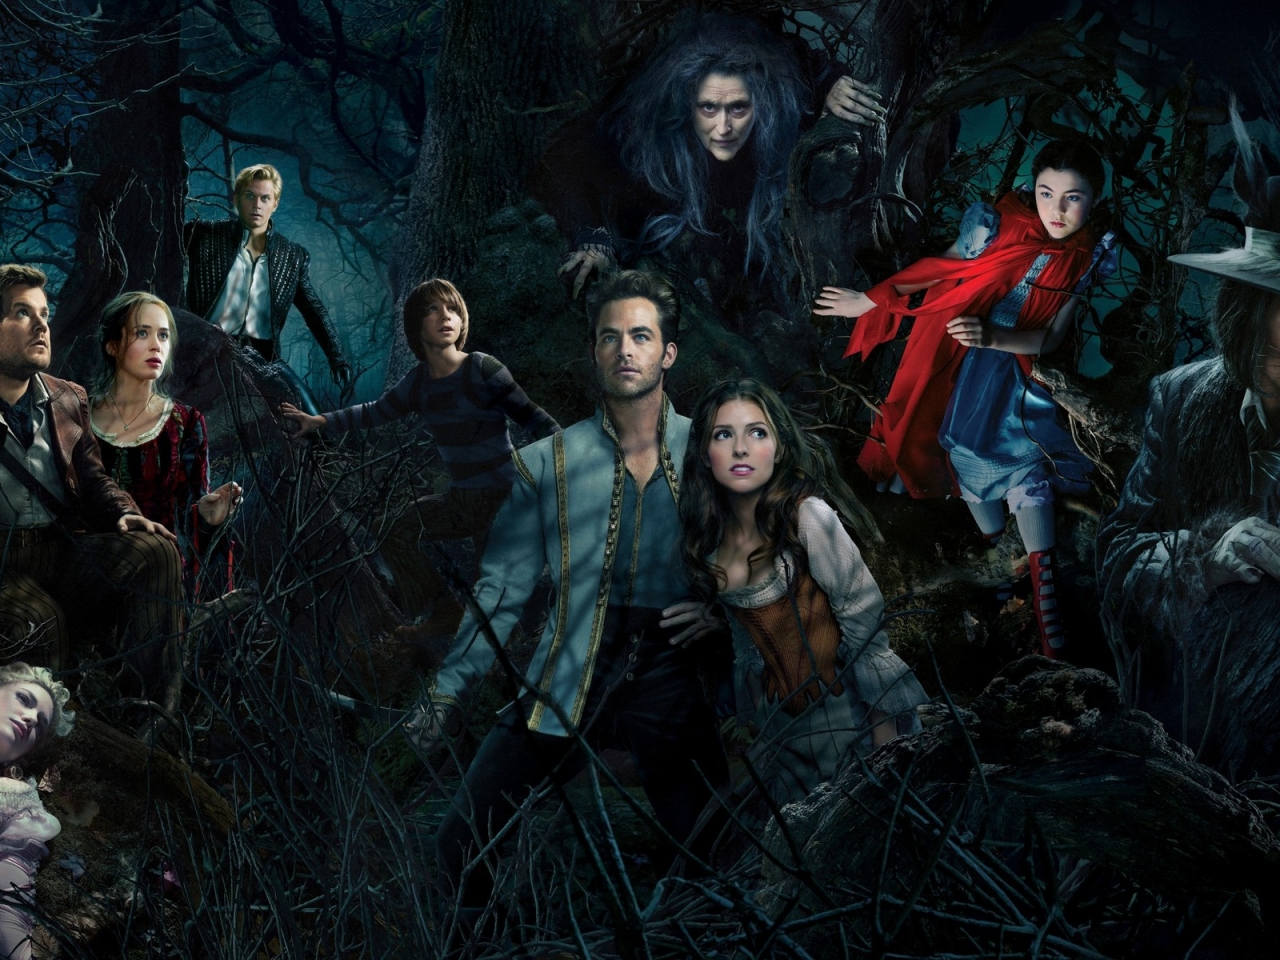 Into the Woods Poster for 1280 x 960 resolution